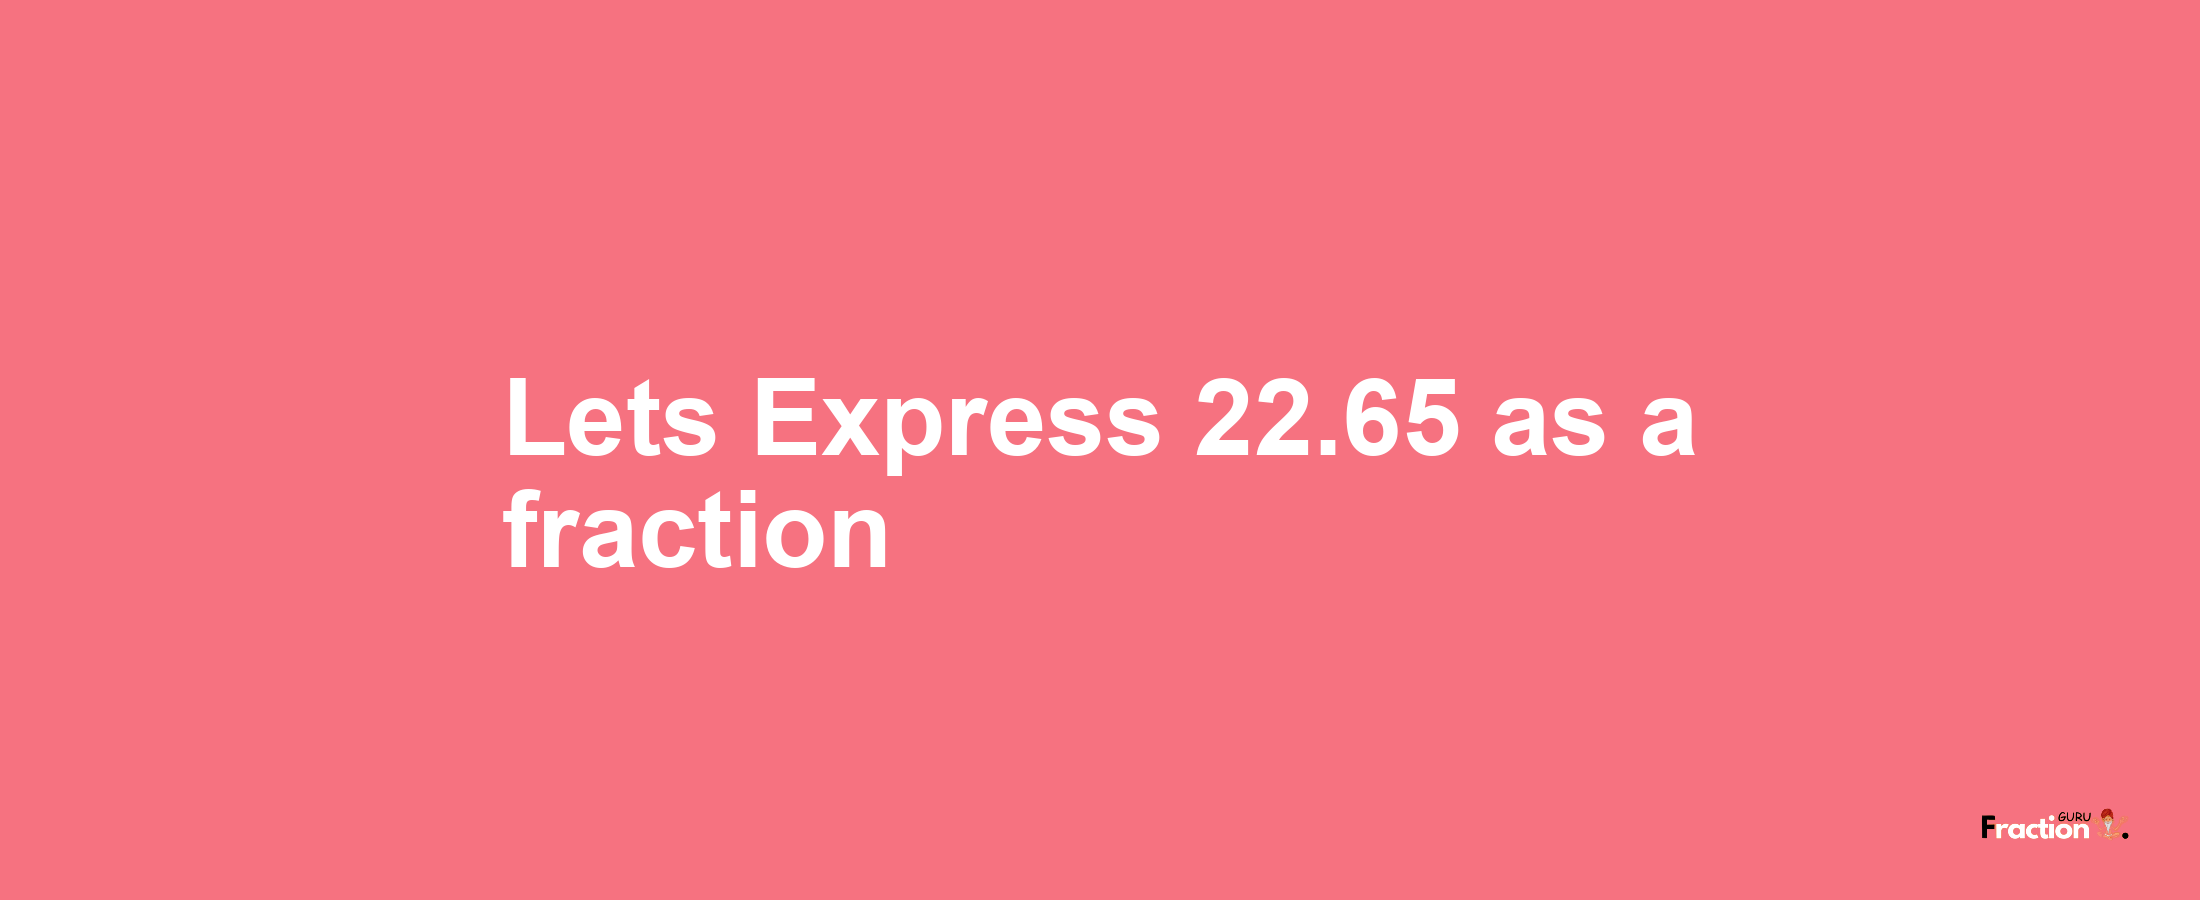 Lets Express 22.65 as afraction